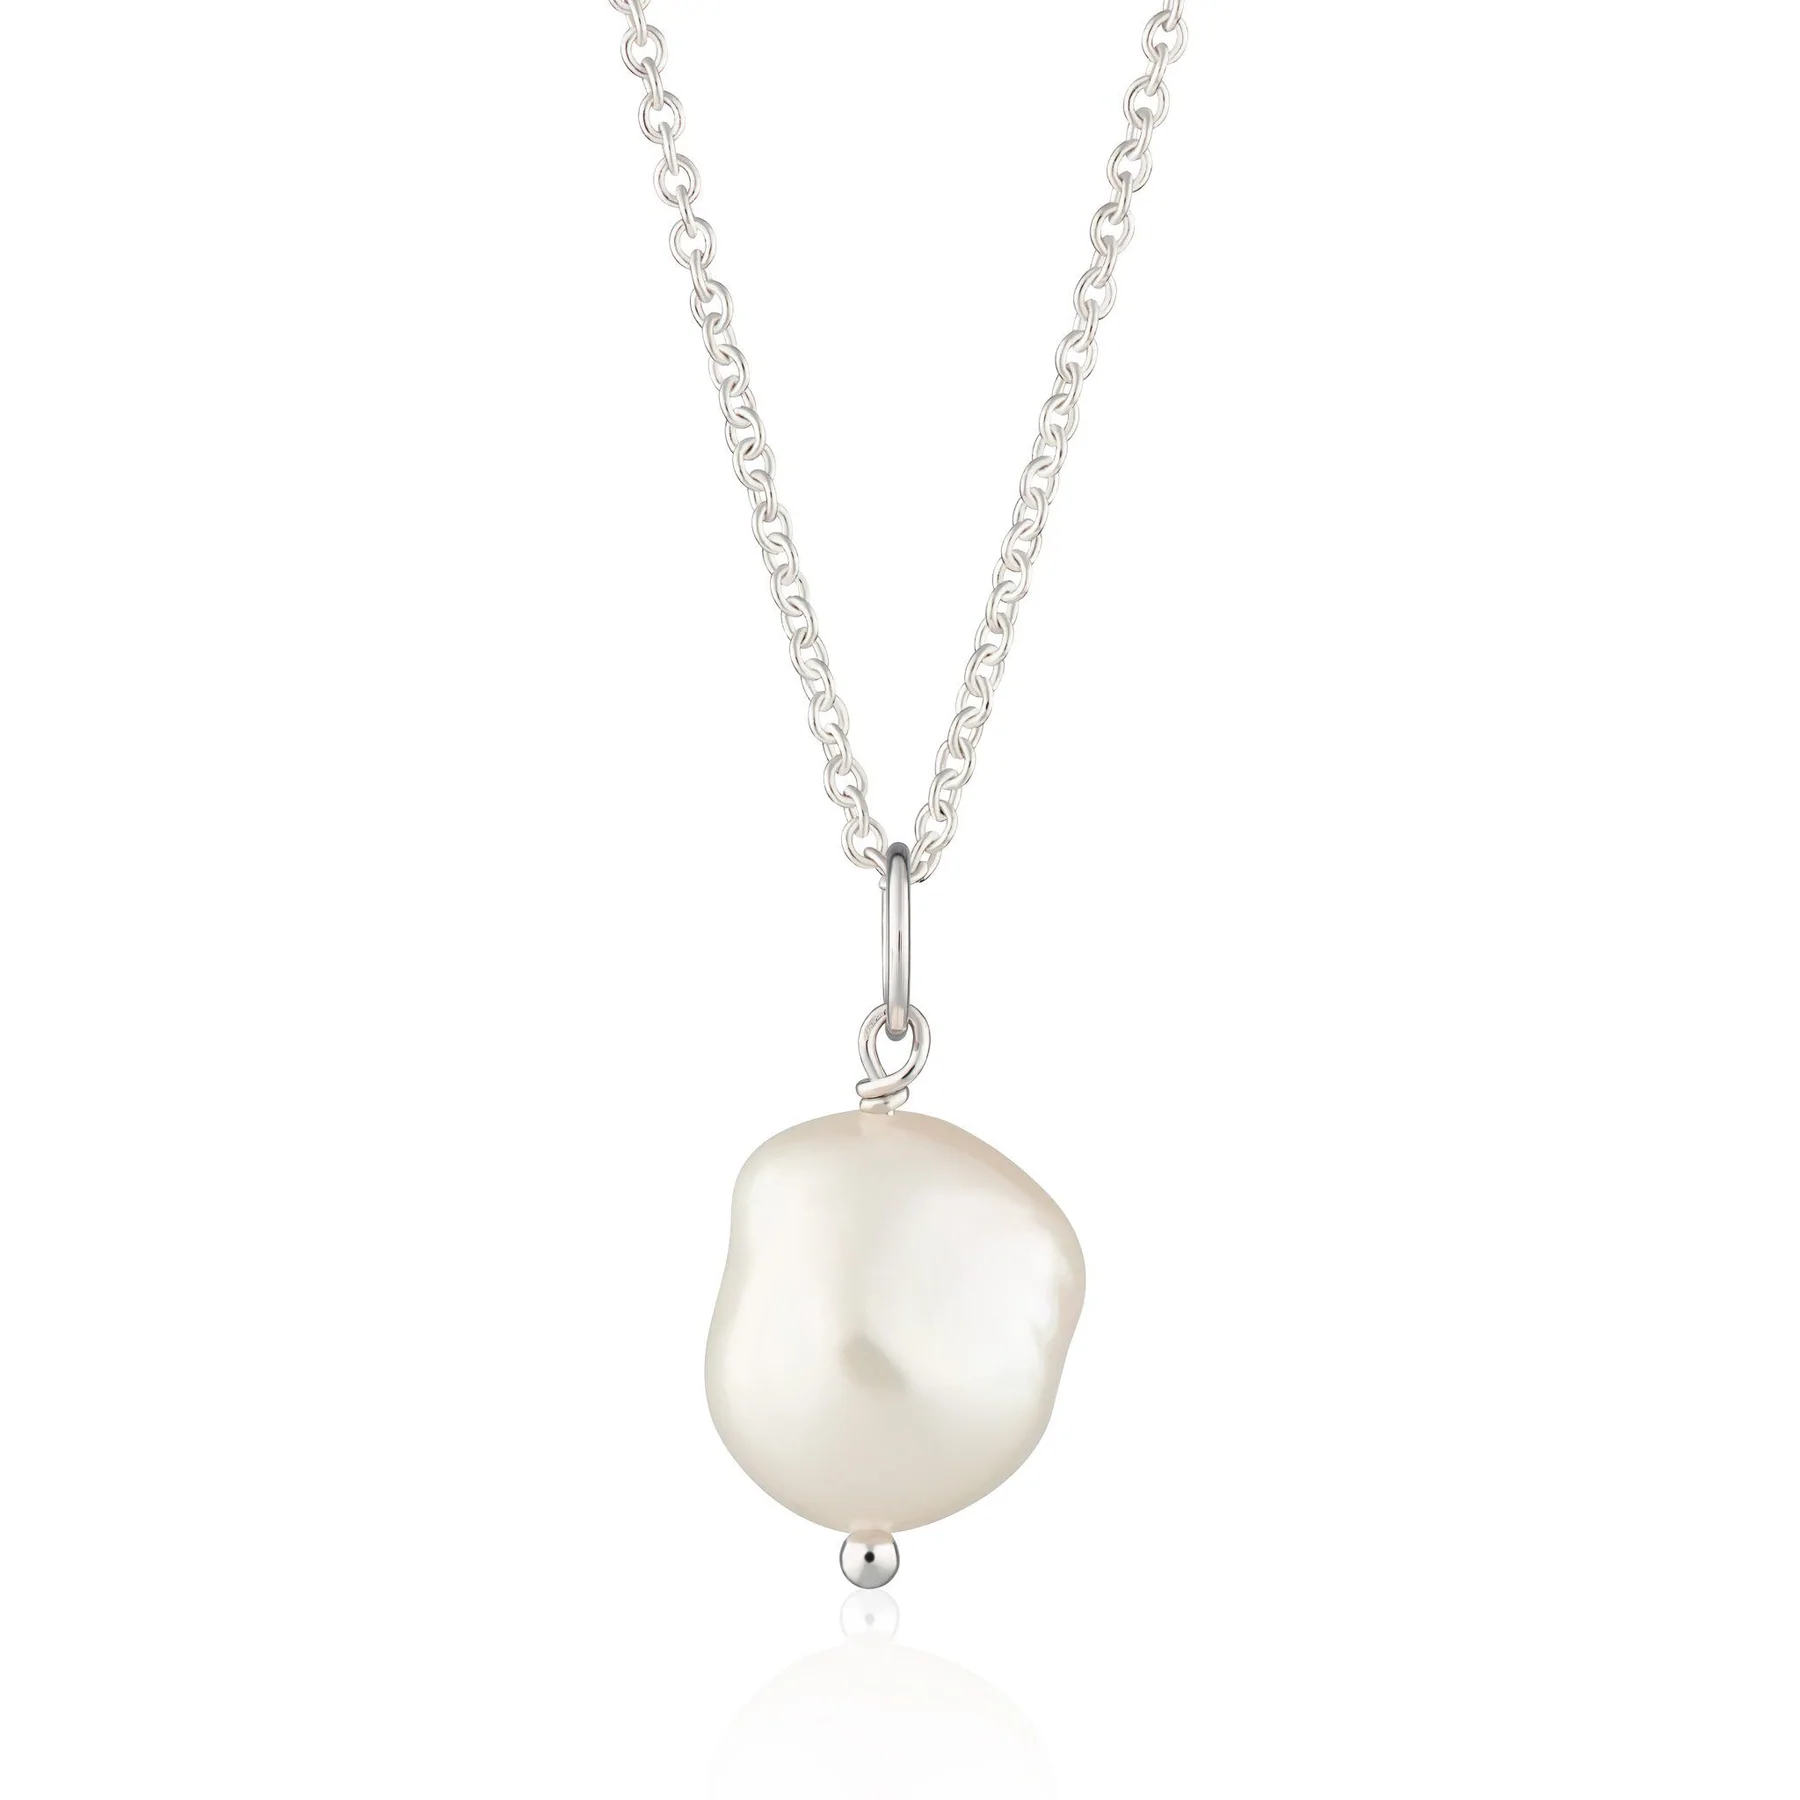 Hannah_Martin_Silver_Baroque_Pearl_Necklace_with_Slider_Clasp_1800x1800